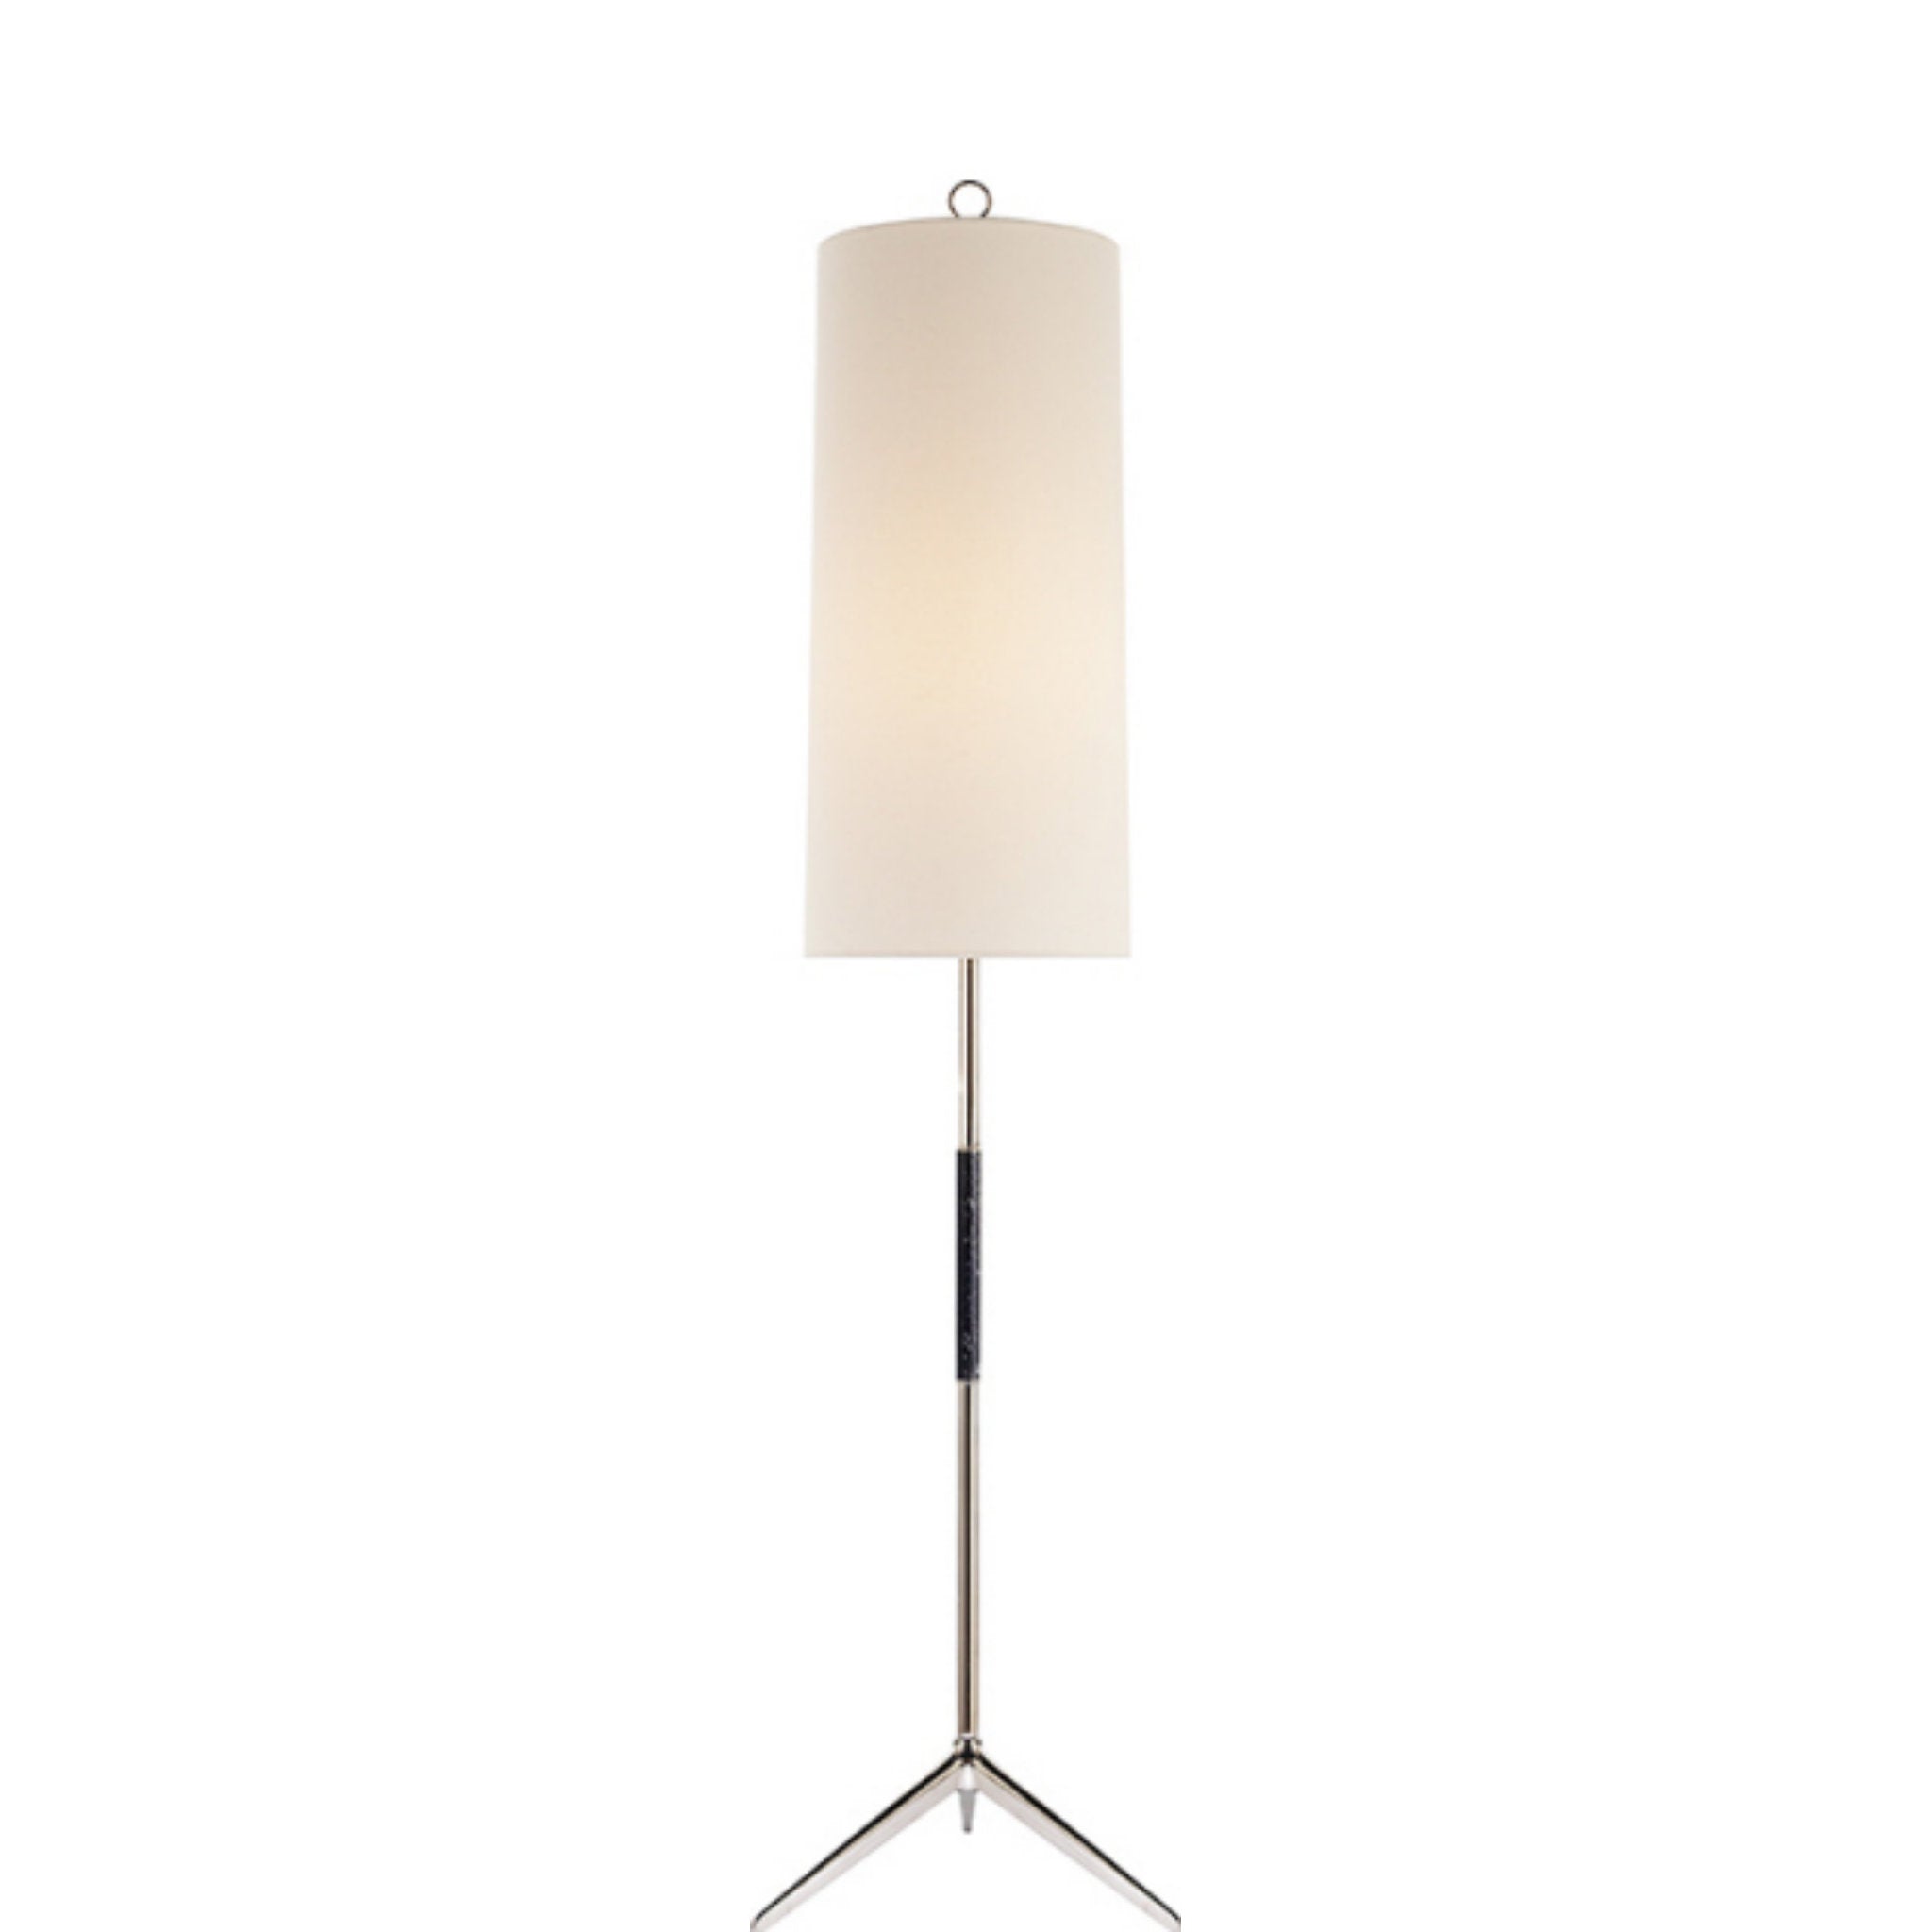 AERIN Frankfort Floor Lamp in Polished Nickel with Ebony Accents and Linen Shade